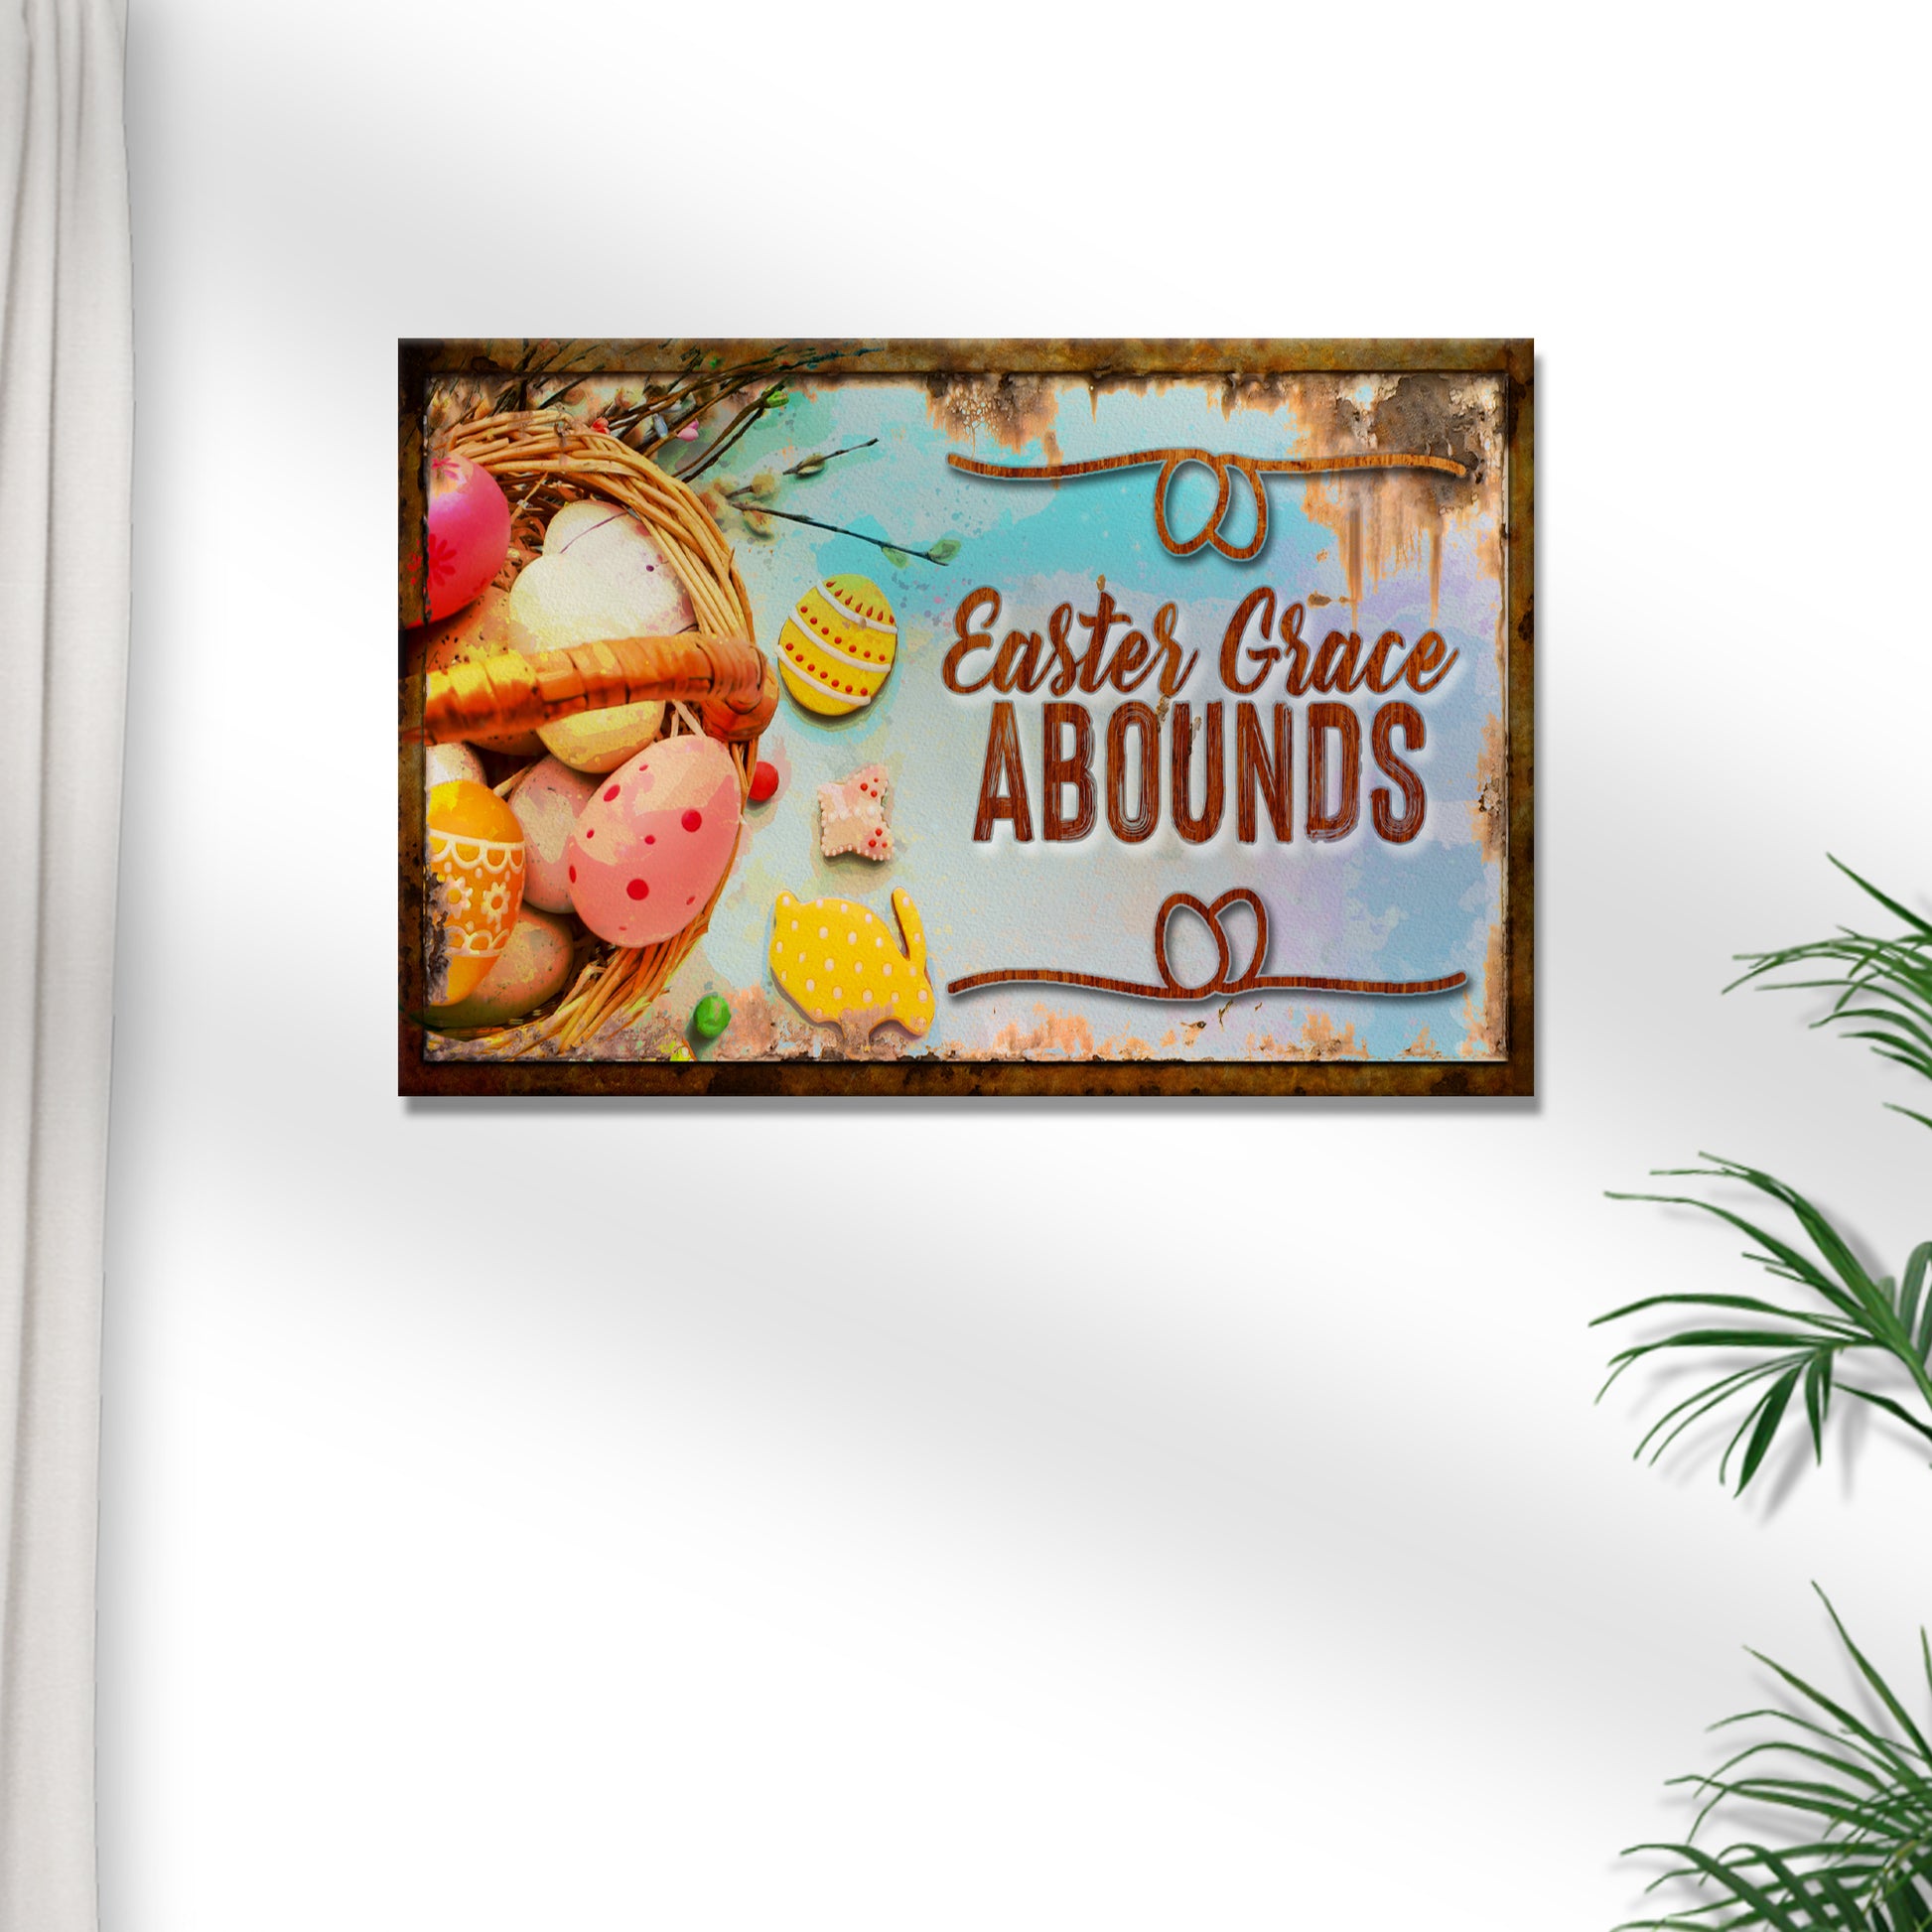 Easter Grace Abounds Sign Style 1 - Image by Tailored Canvases